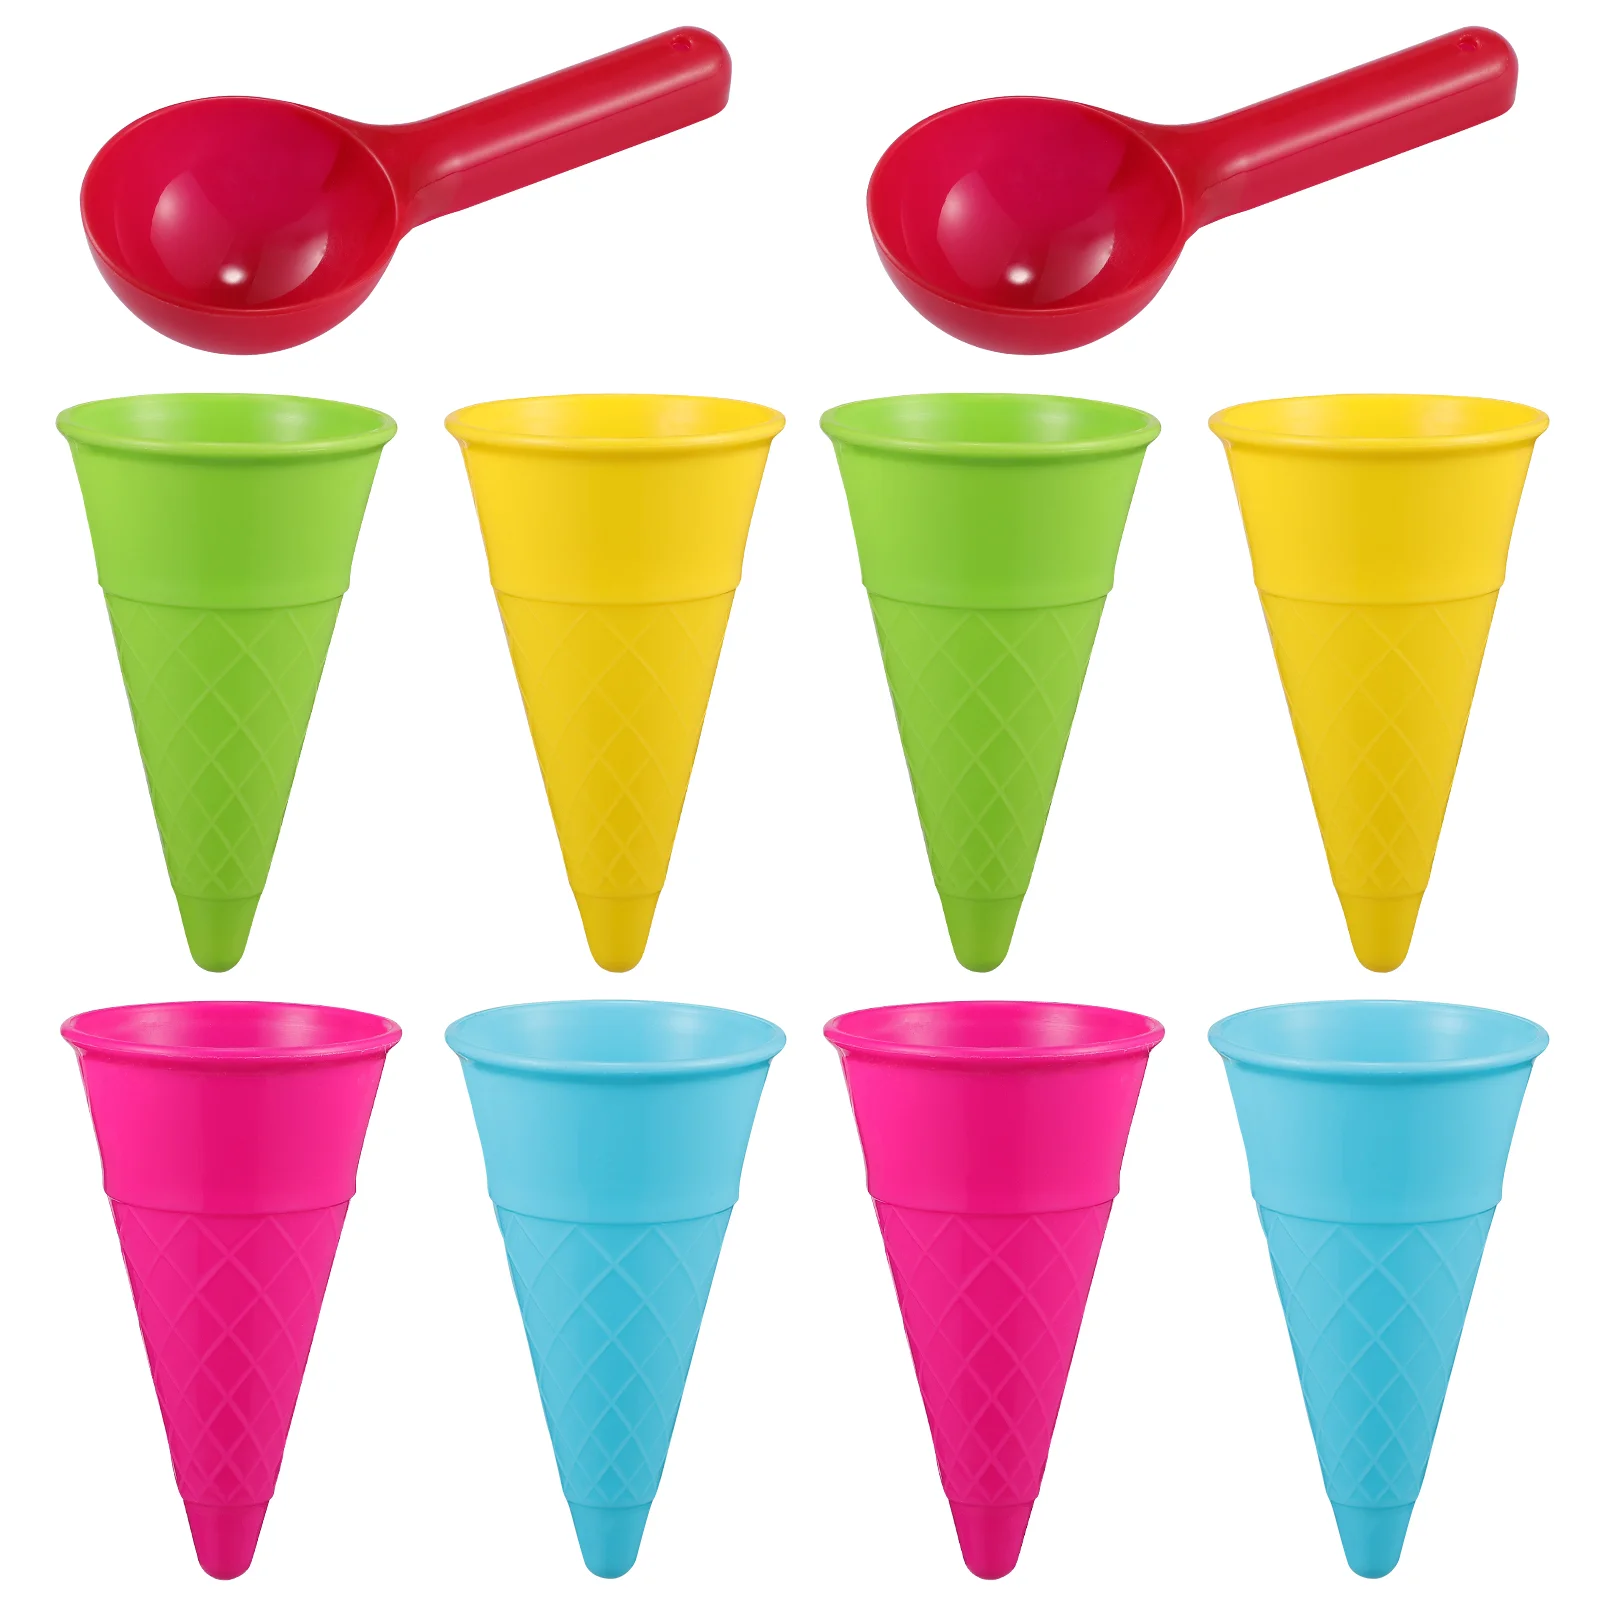 

Toyandona Play House Beach Ice Cream Cone Scoop Set (random Color 5pcs/pack) 2 Packs for Sale Sand Playing with Children